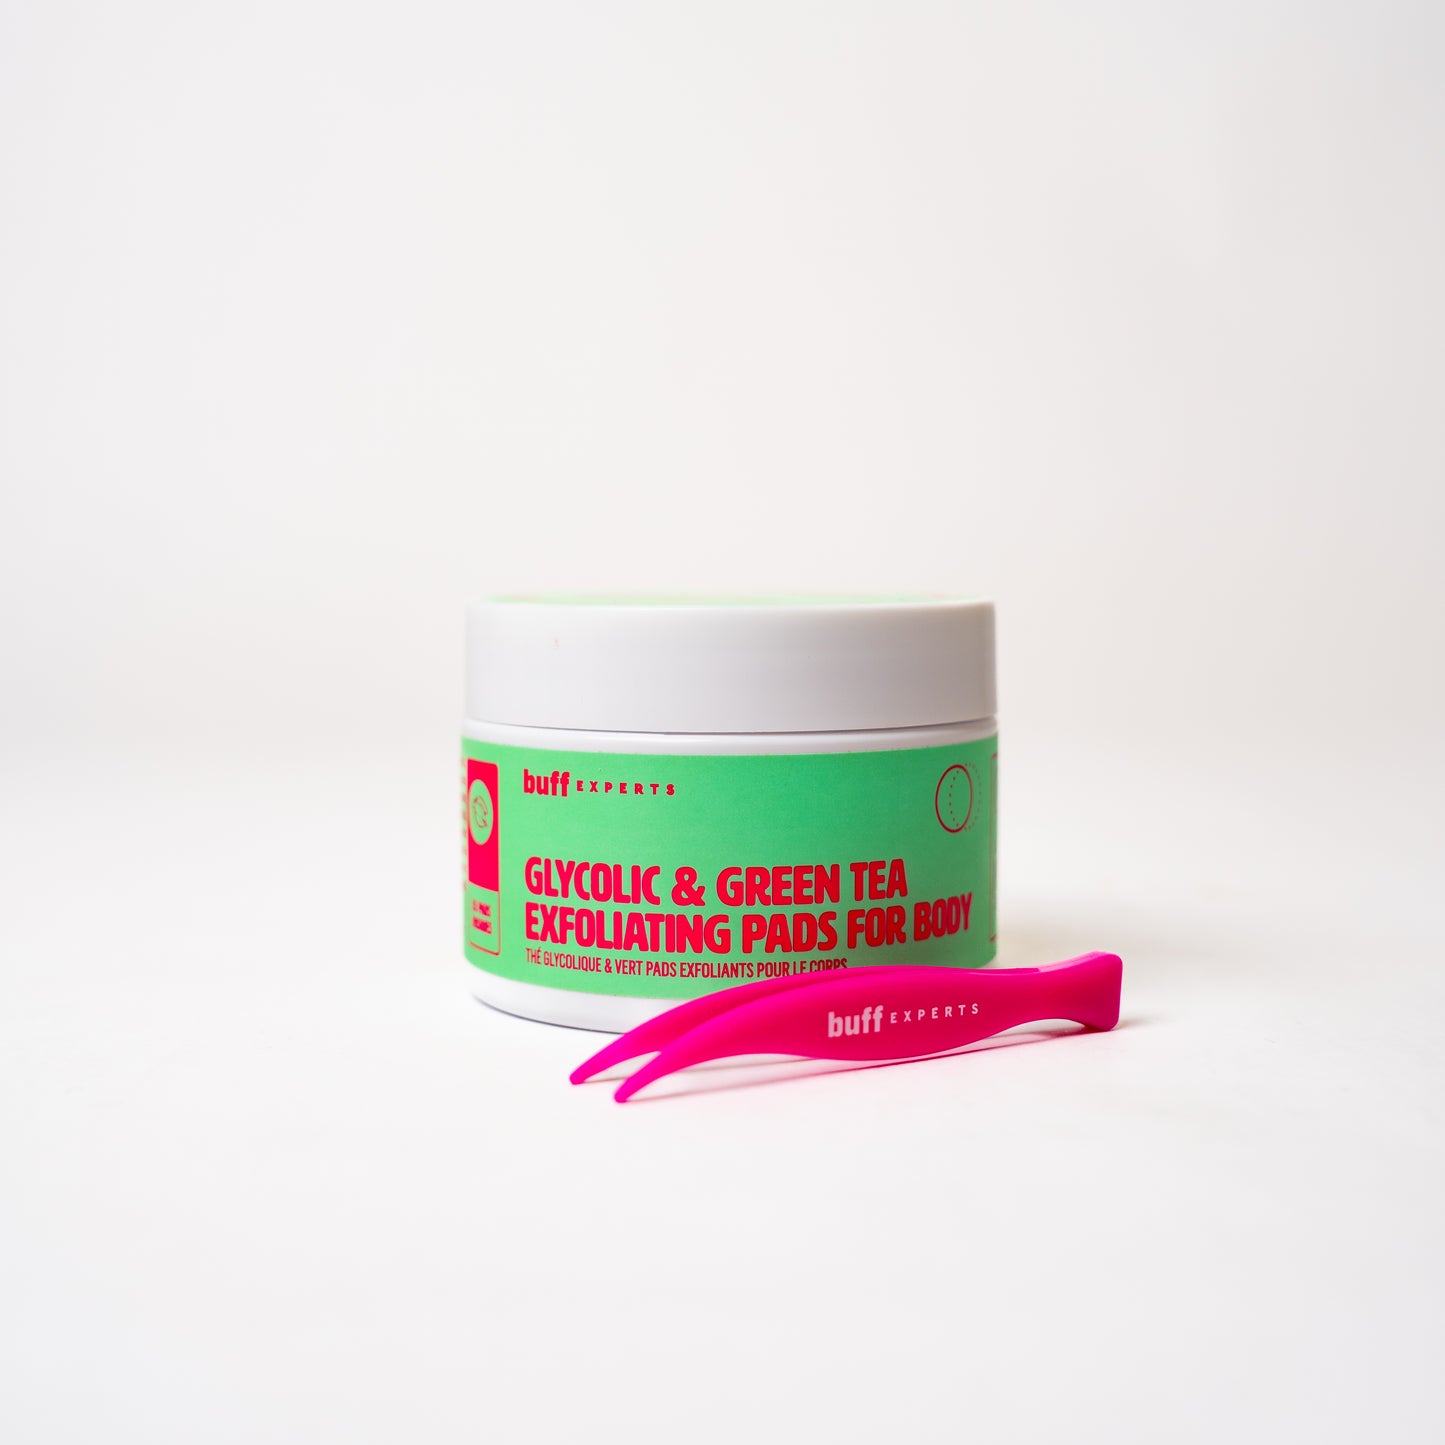 Glycolic & Green Tea 3-In-1 Exfoliating Pads